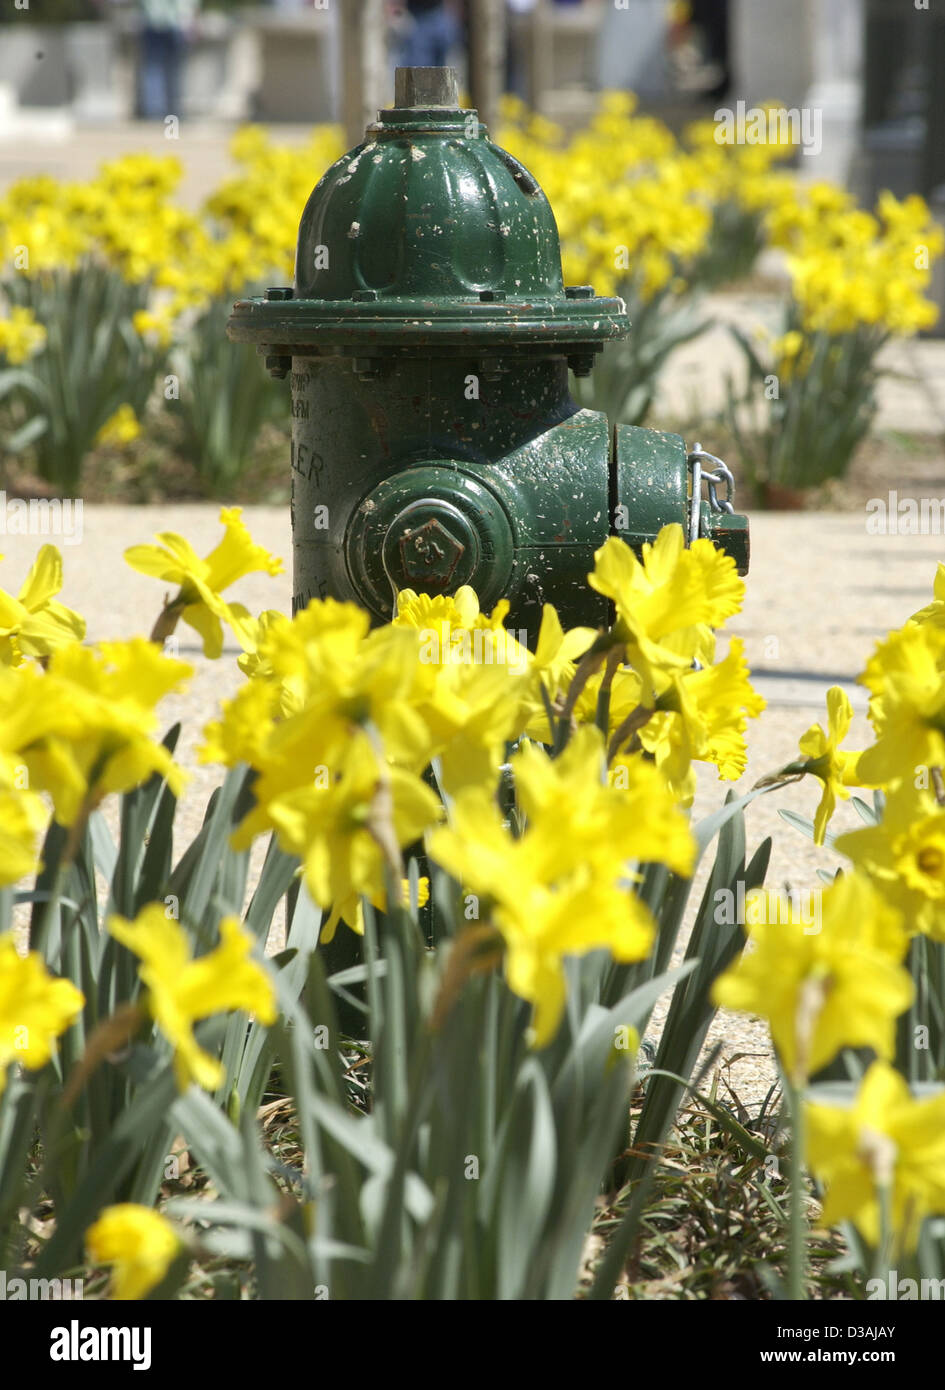 Green fire hydrant surrounded by yellow daffodils Washington, D.C.  USA, Stock Photo